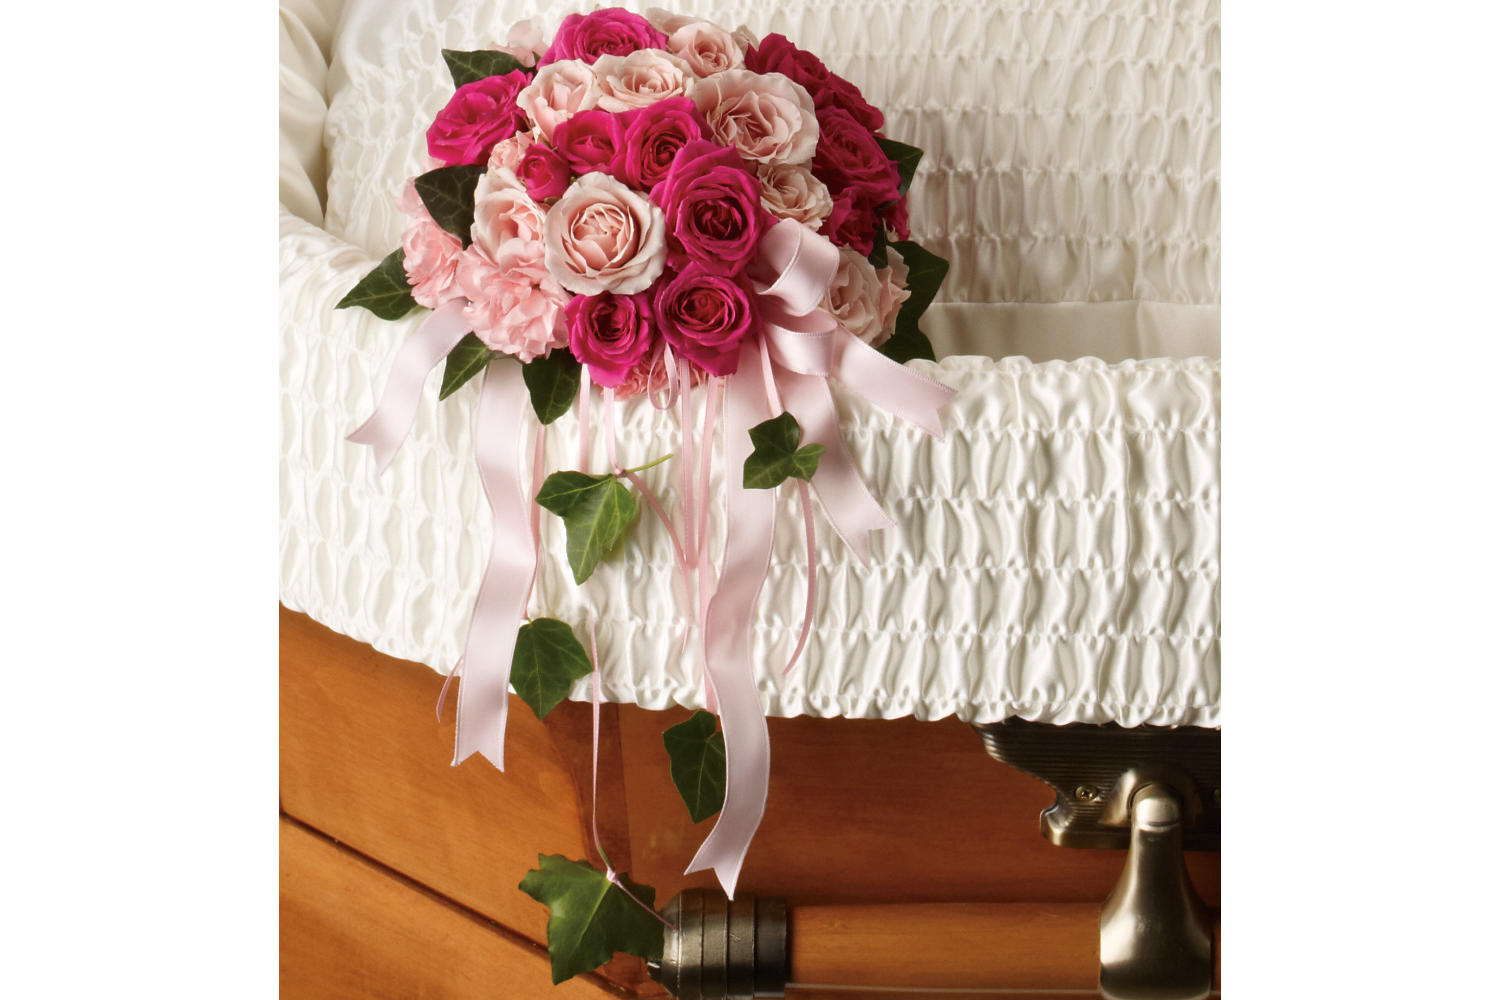 A delicate bouquet includes hot pink spray roses and light pink miniature carnations tied with pink satin ribbon, accented with green ivy. this funeral flower arrangement is hanging on the corner of an opened brown casket